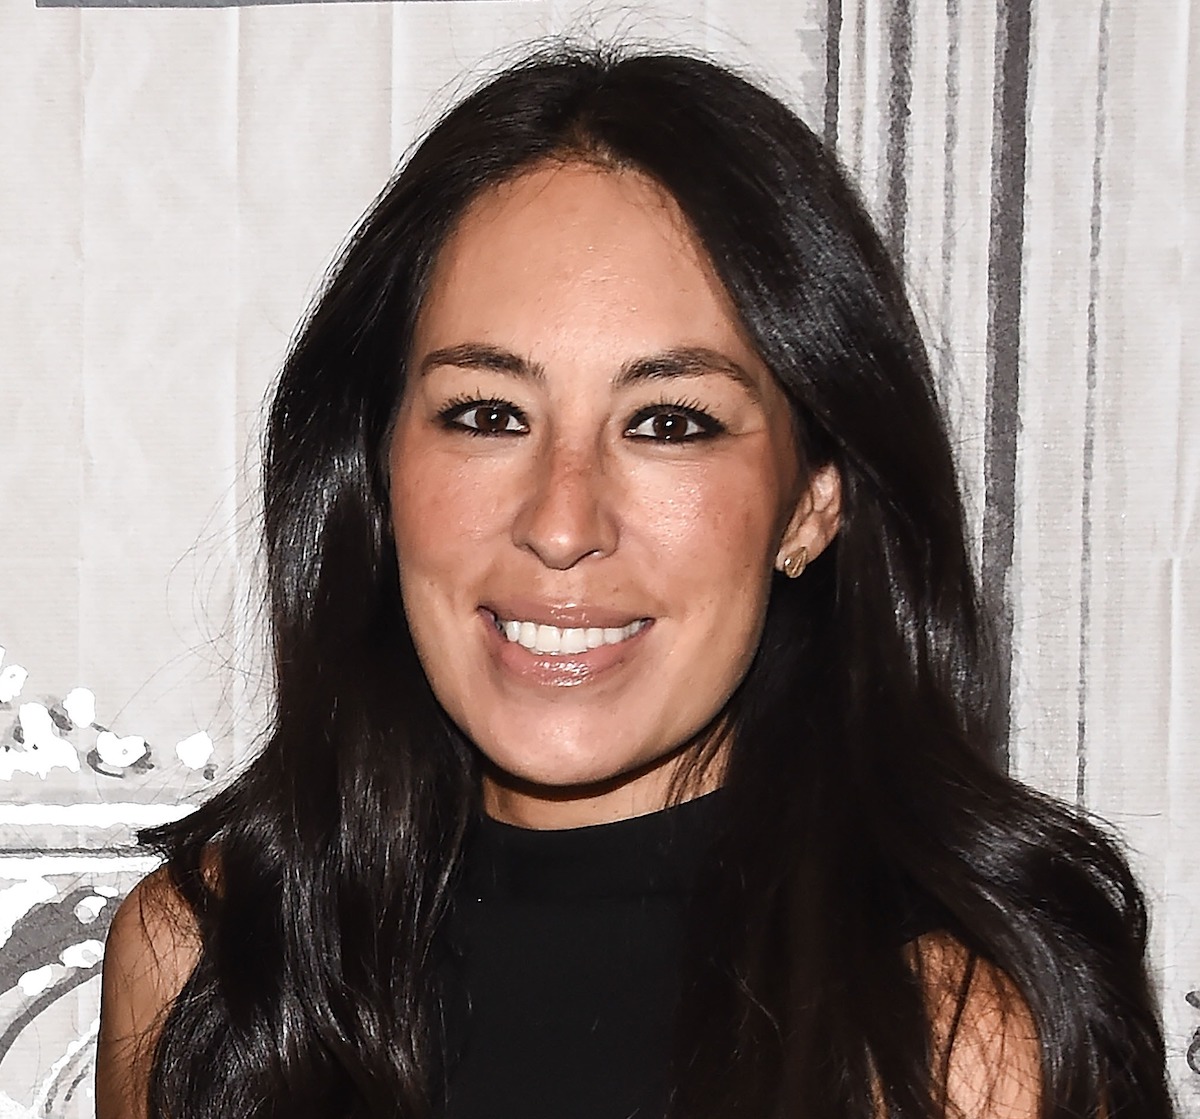 Magnolia Table star Joanna Gaines makes a mean french toast crunch